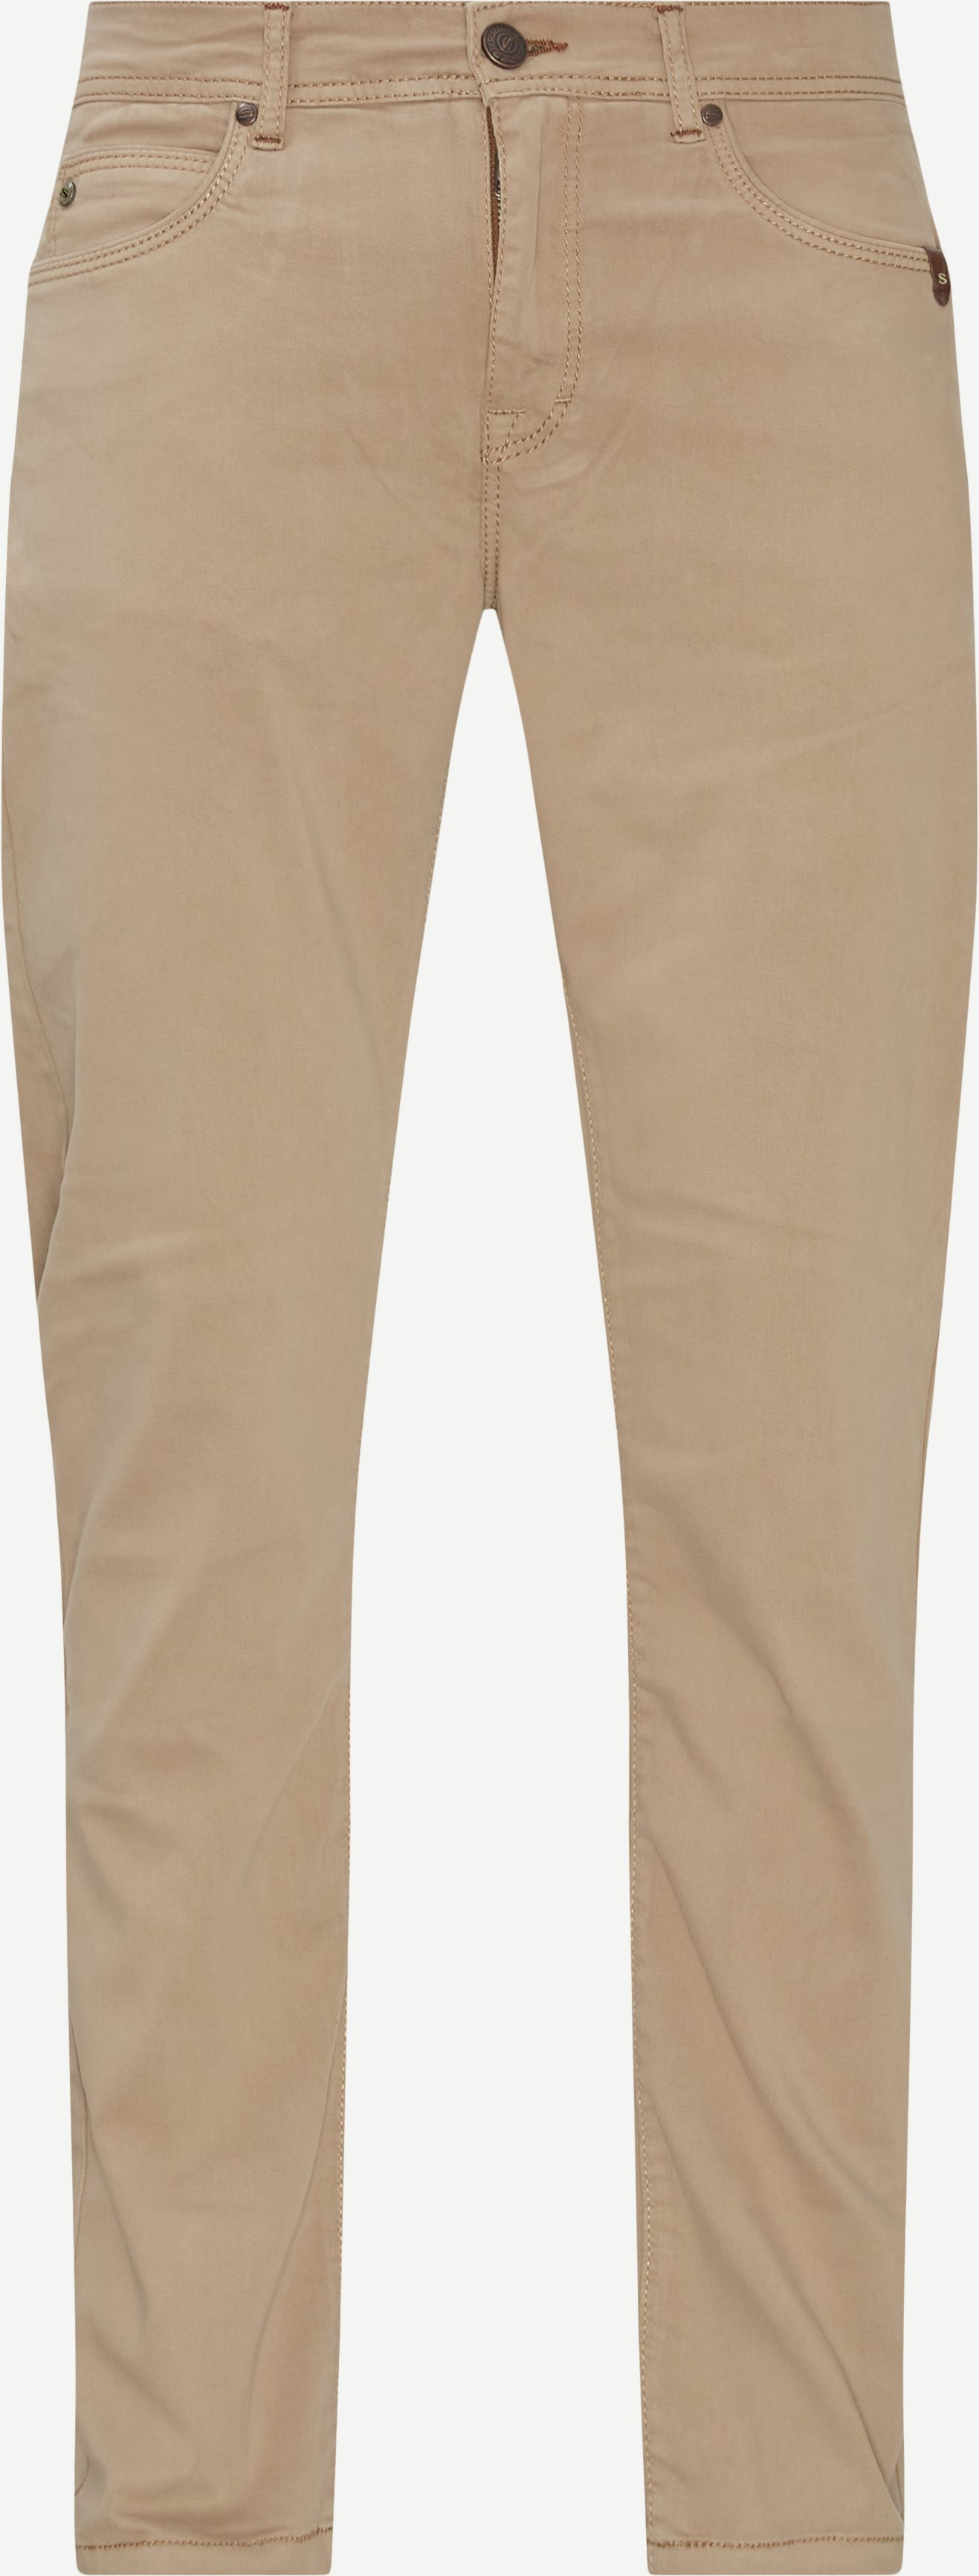 Suede Touch Burton Jeans - Jeans - Modern fit - Sand